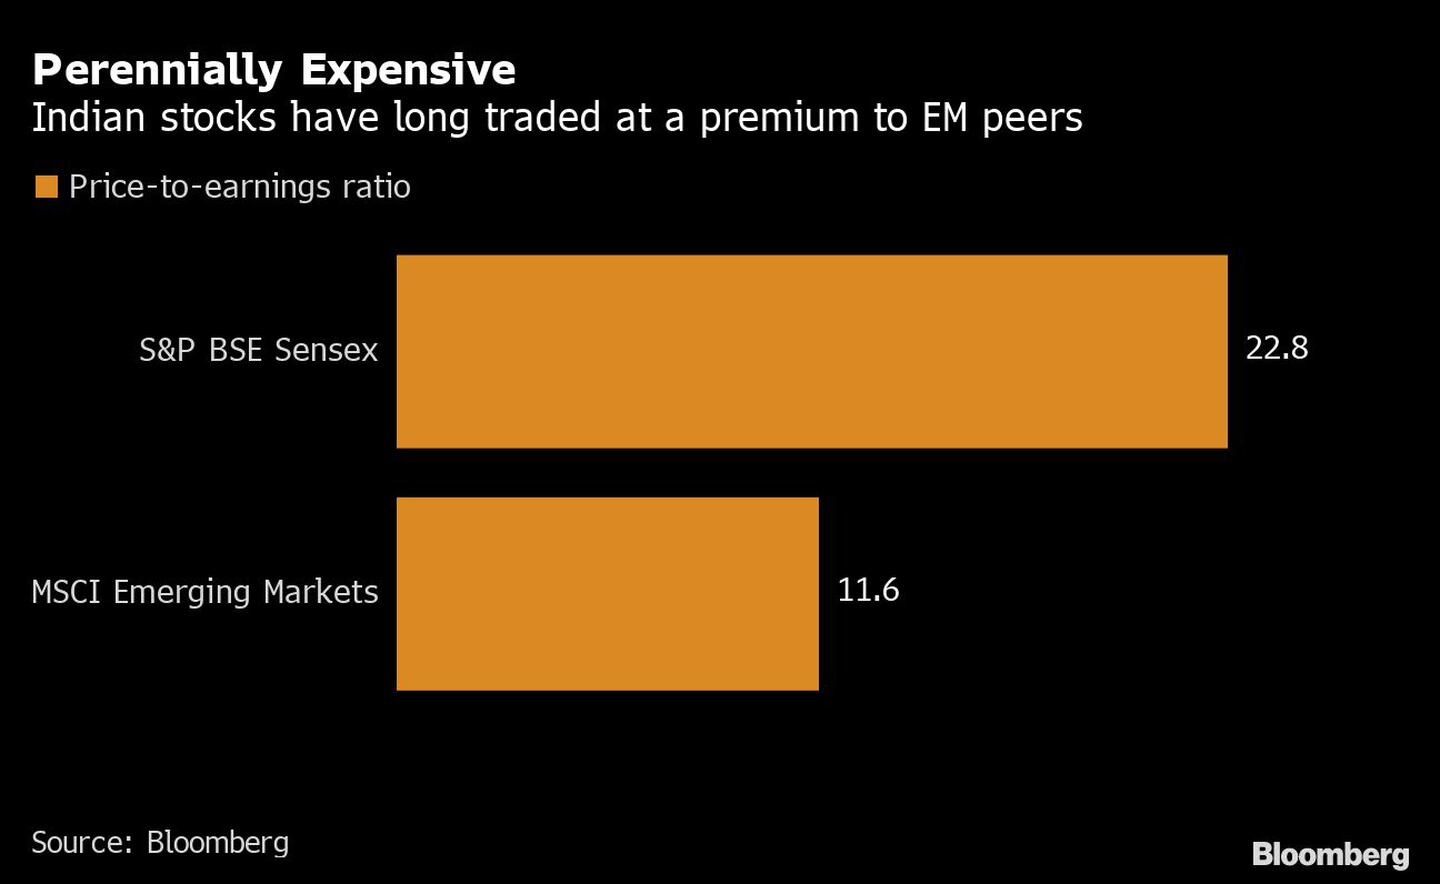 Perennially Expensive | Indian stocks have long traded at a premium to EM peersdfd